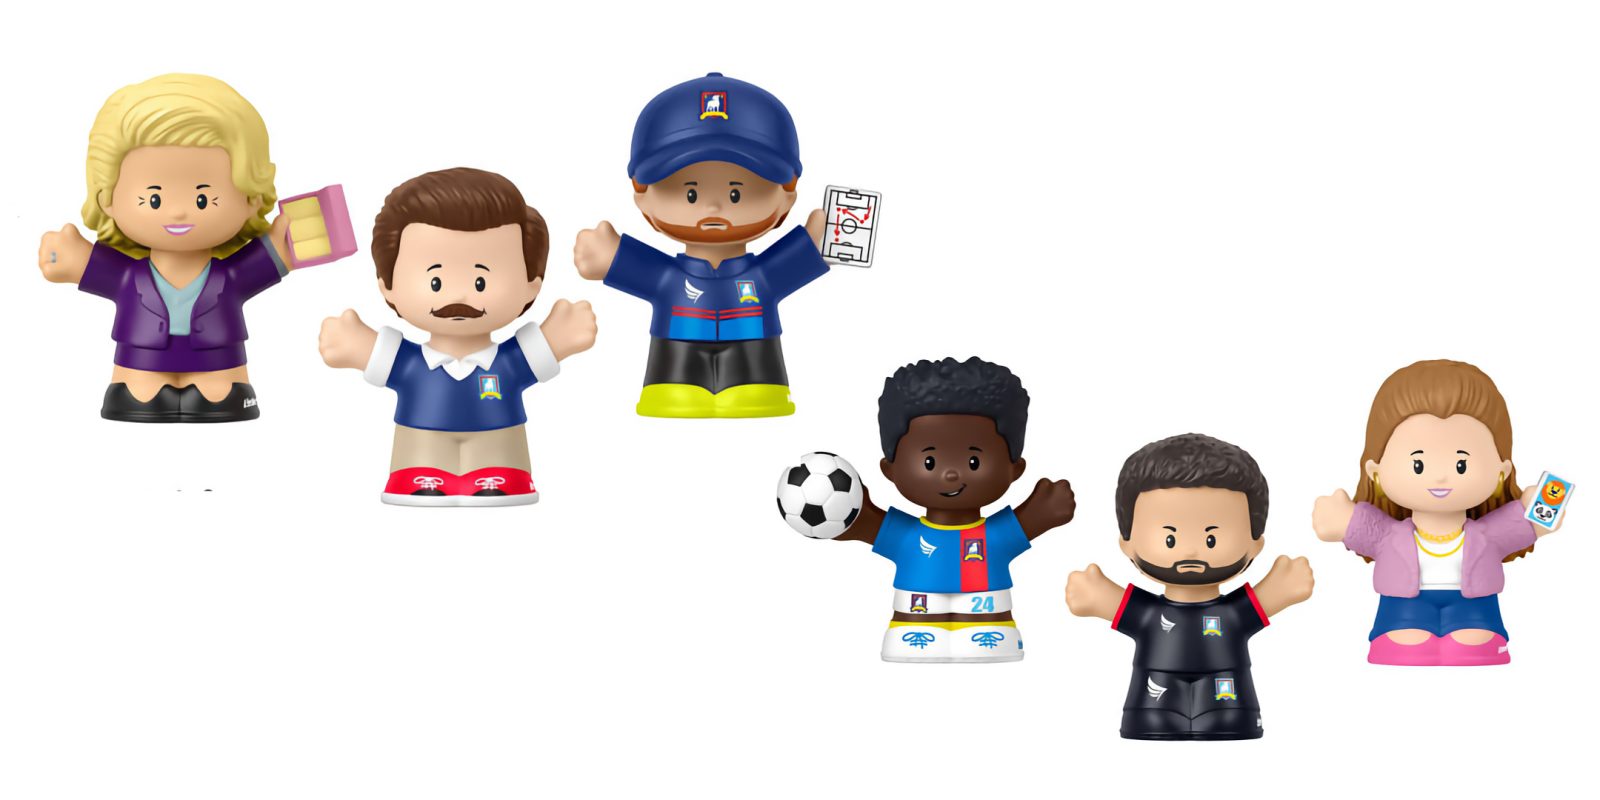 photo of Adorable Ted Lasso figurines available for a limited time from Fisher-Price image